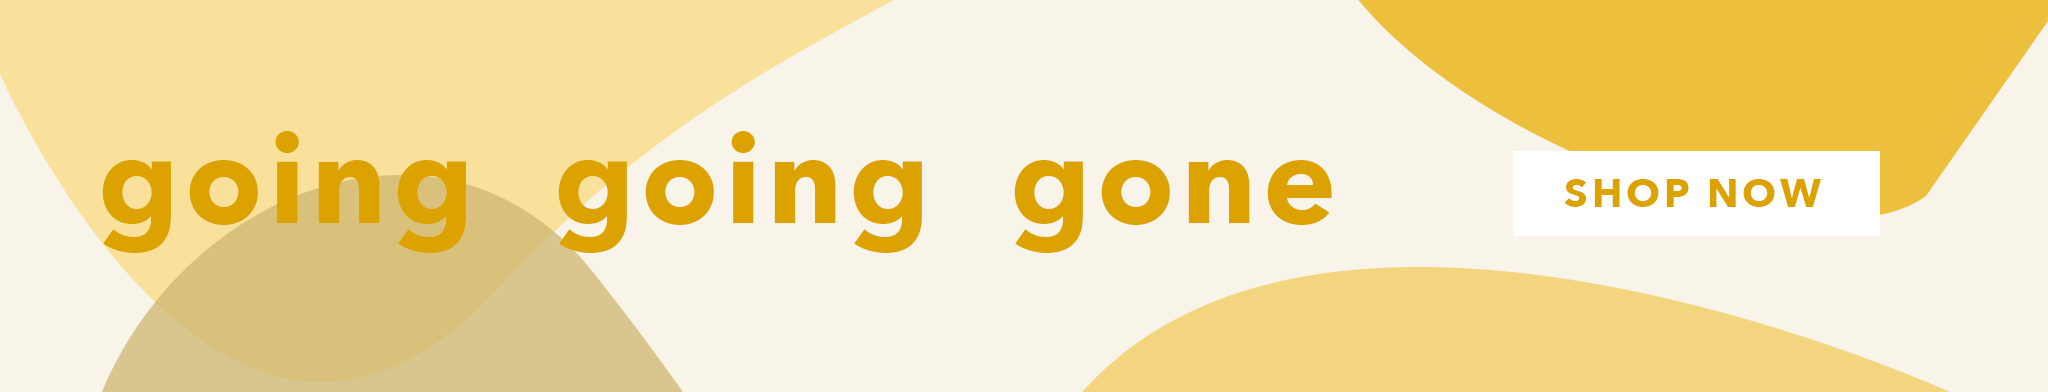 going going gone sale